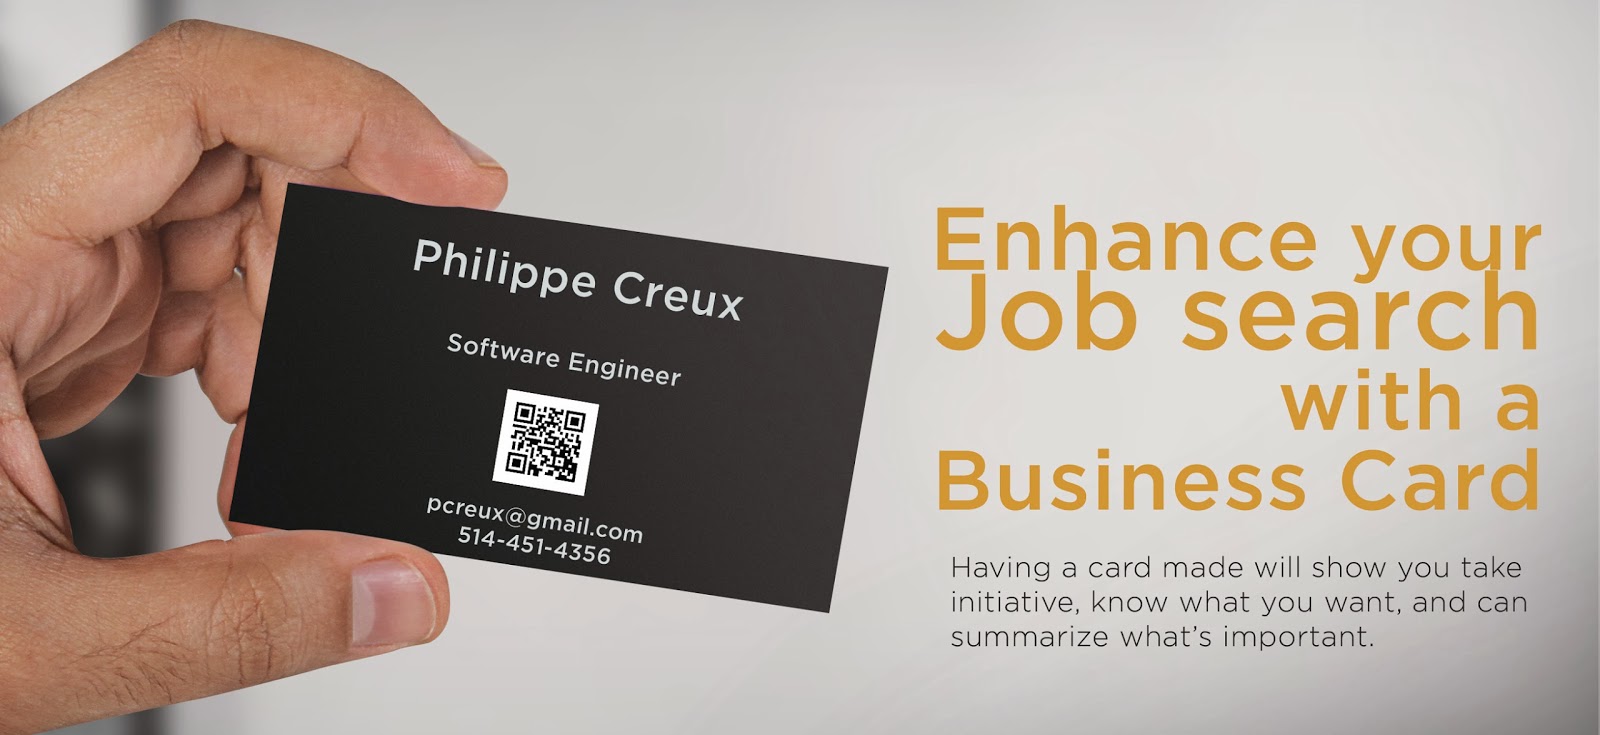 networking business cards for job seekers 2